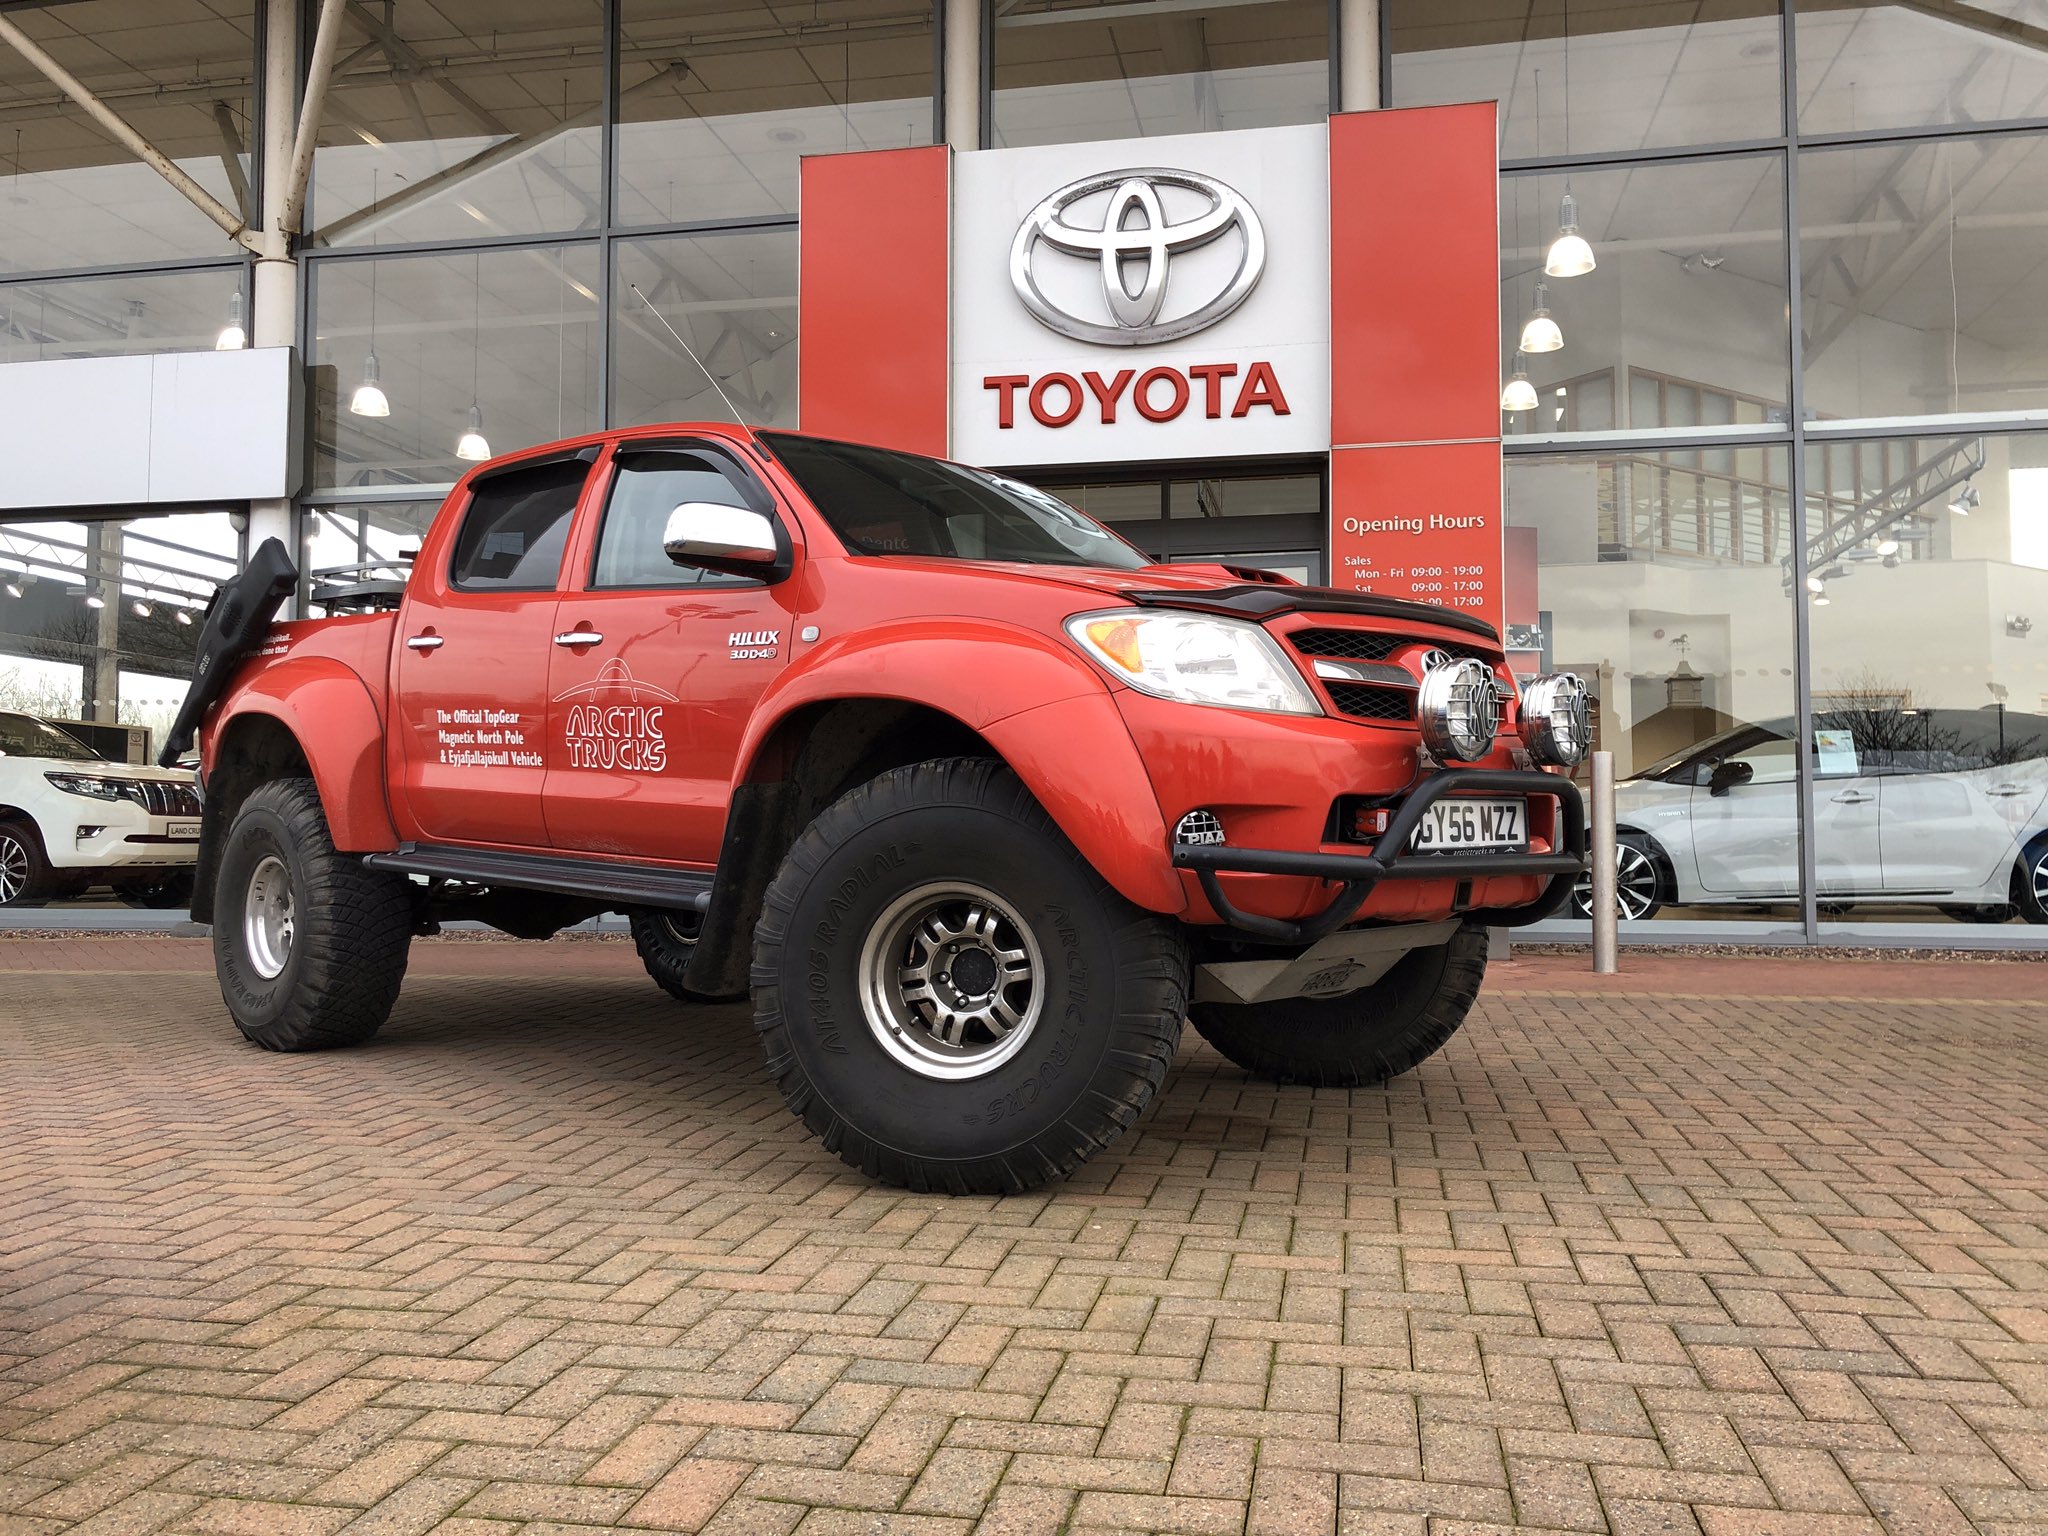 Narkoman flise Frigøre RRG Denton Toyota on Twitter: "Look at this beast we had in yesterday, the Top  Gear Toyota Hilux AT38!🔥 This famous beast is from a Top Gear episode in  which James May